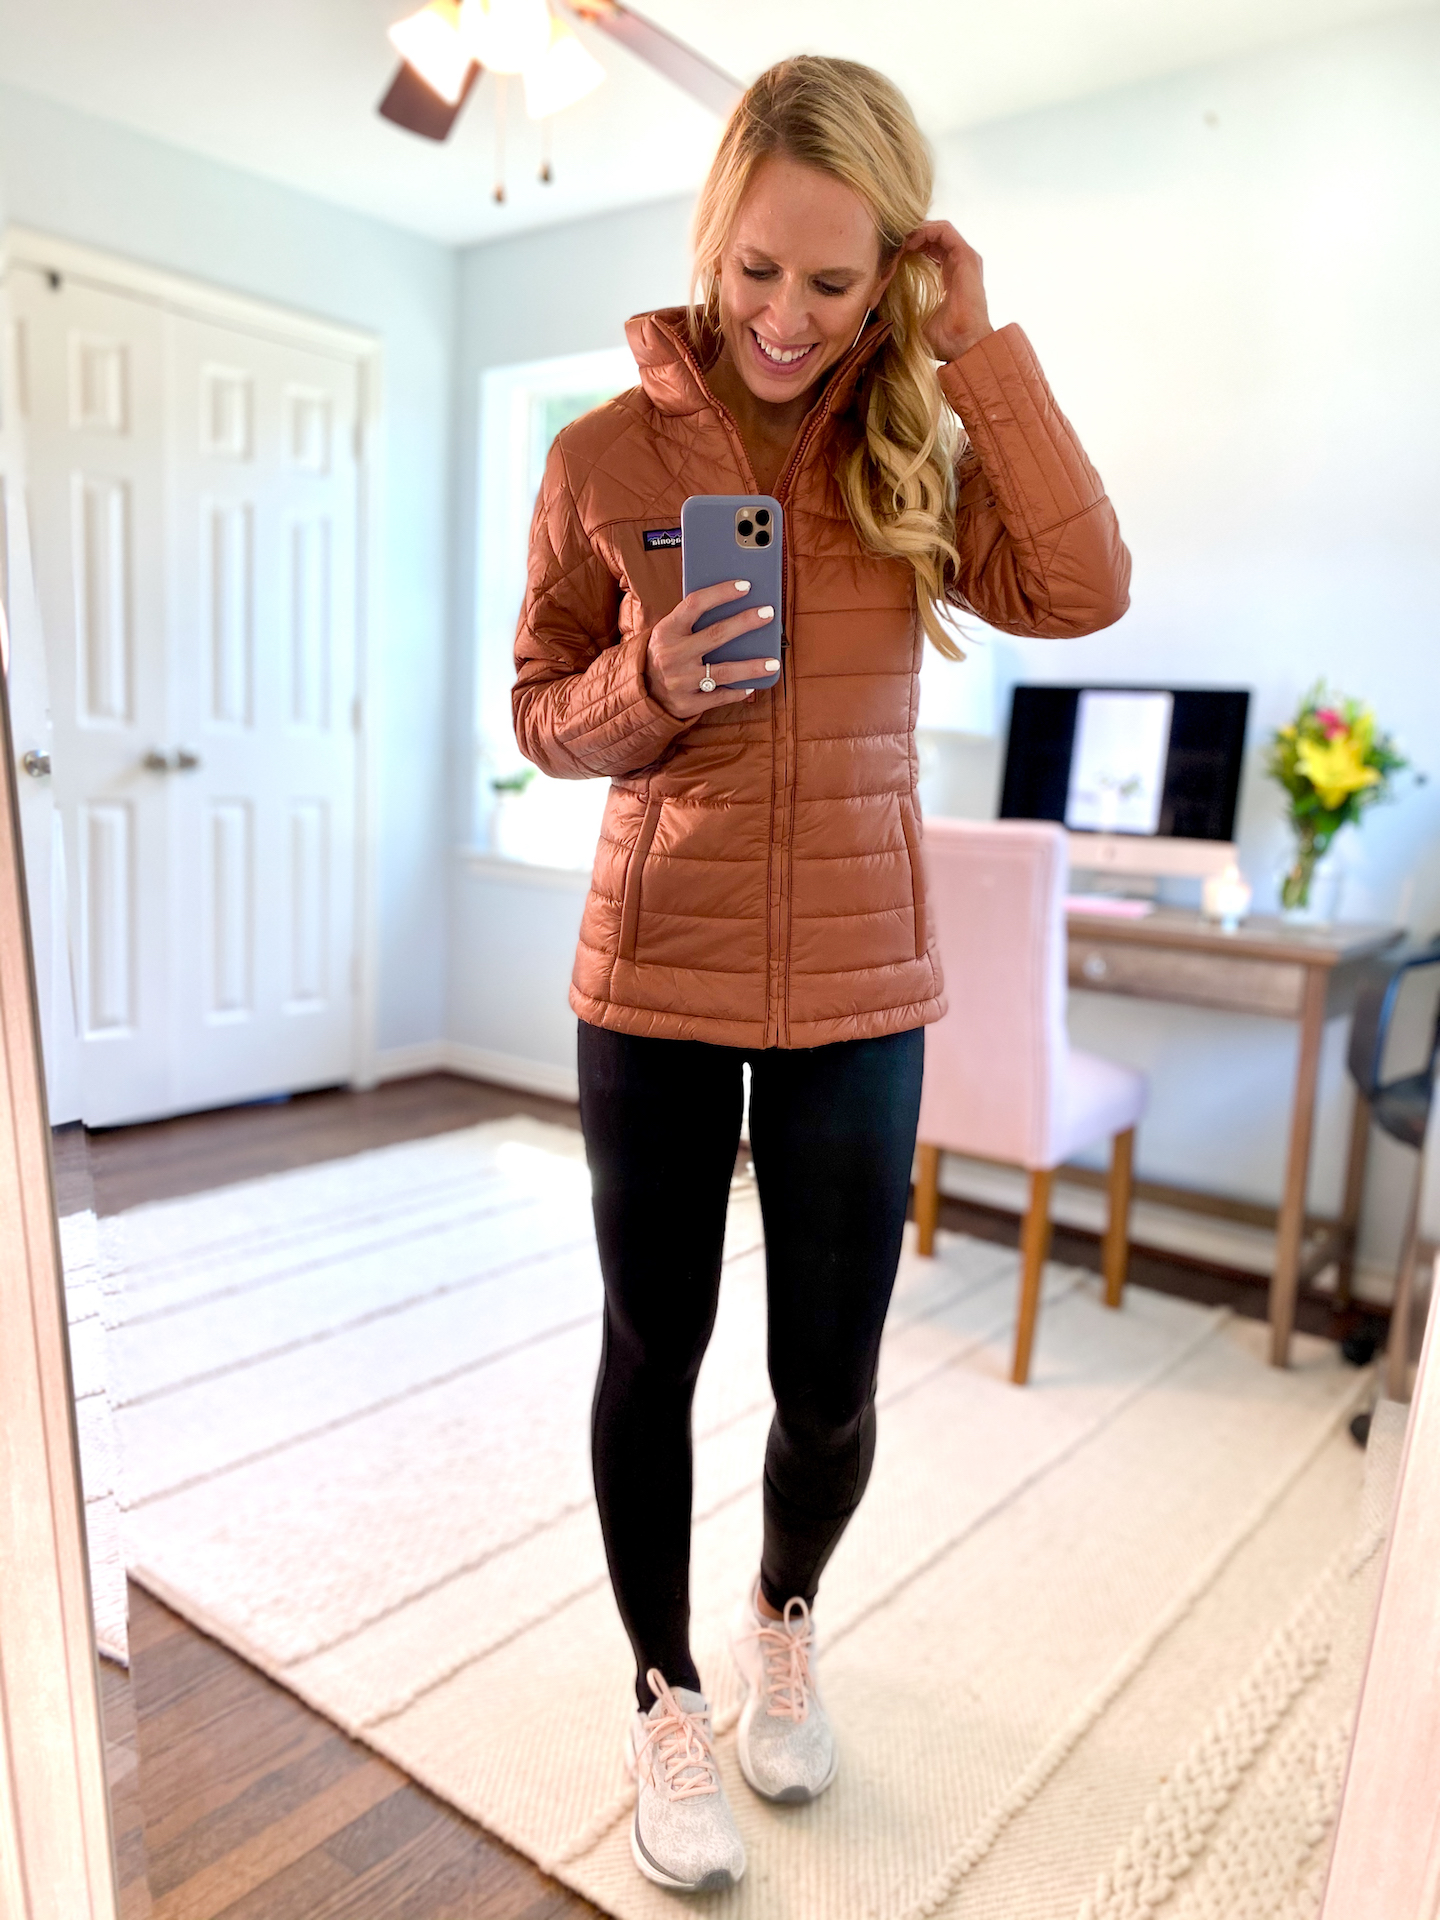 Favorite jacket in the Nordstrom Sale! Let’s get to the Women’s Nordstrom Anniversary Sale 2020 Shopping Guide!